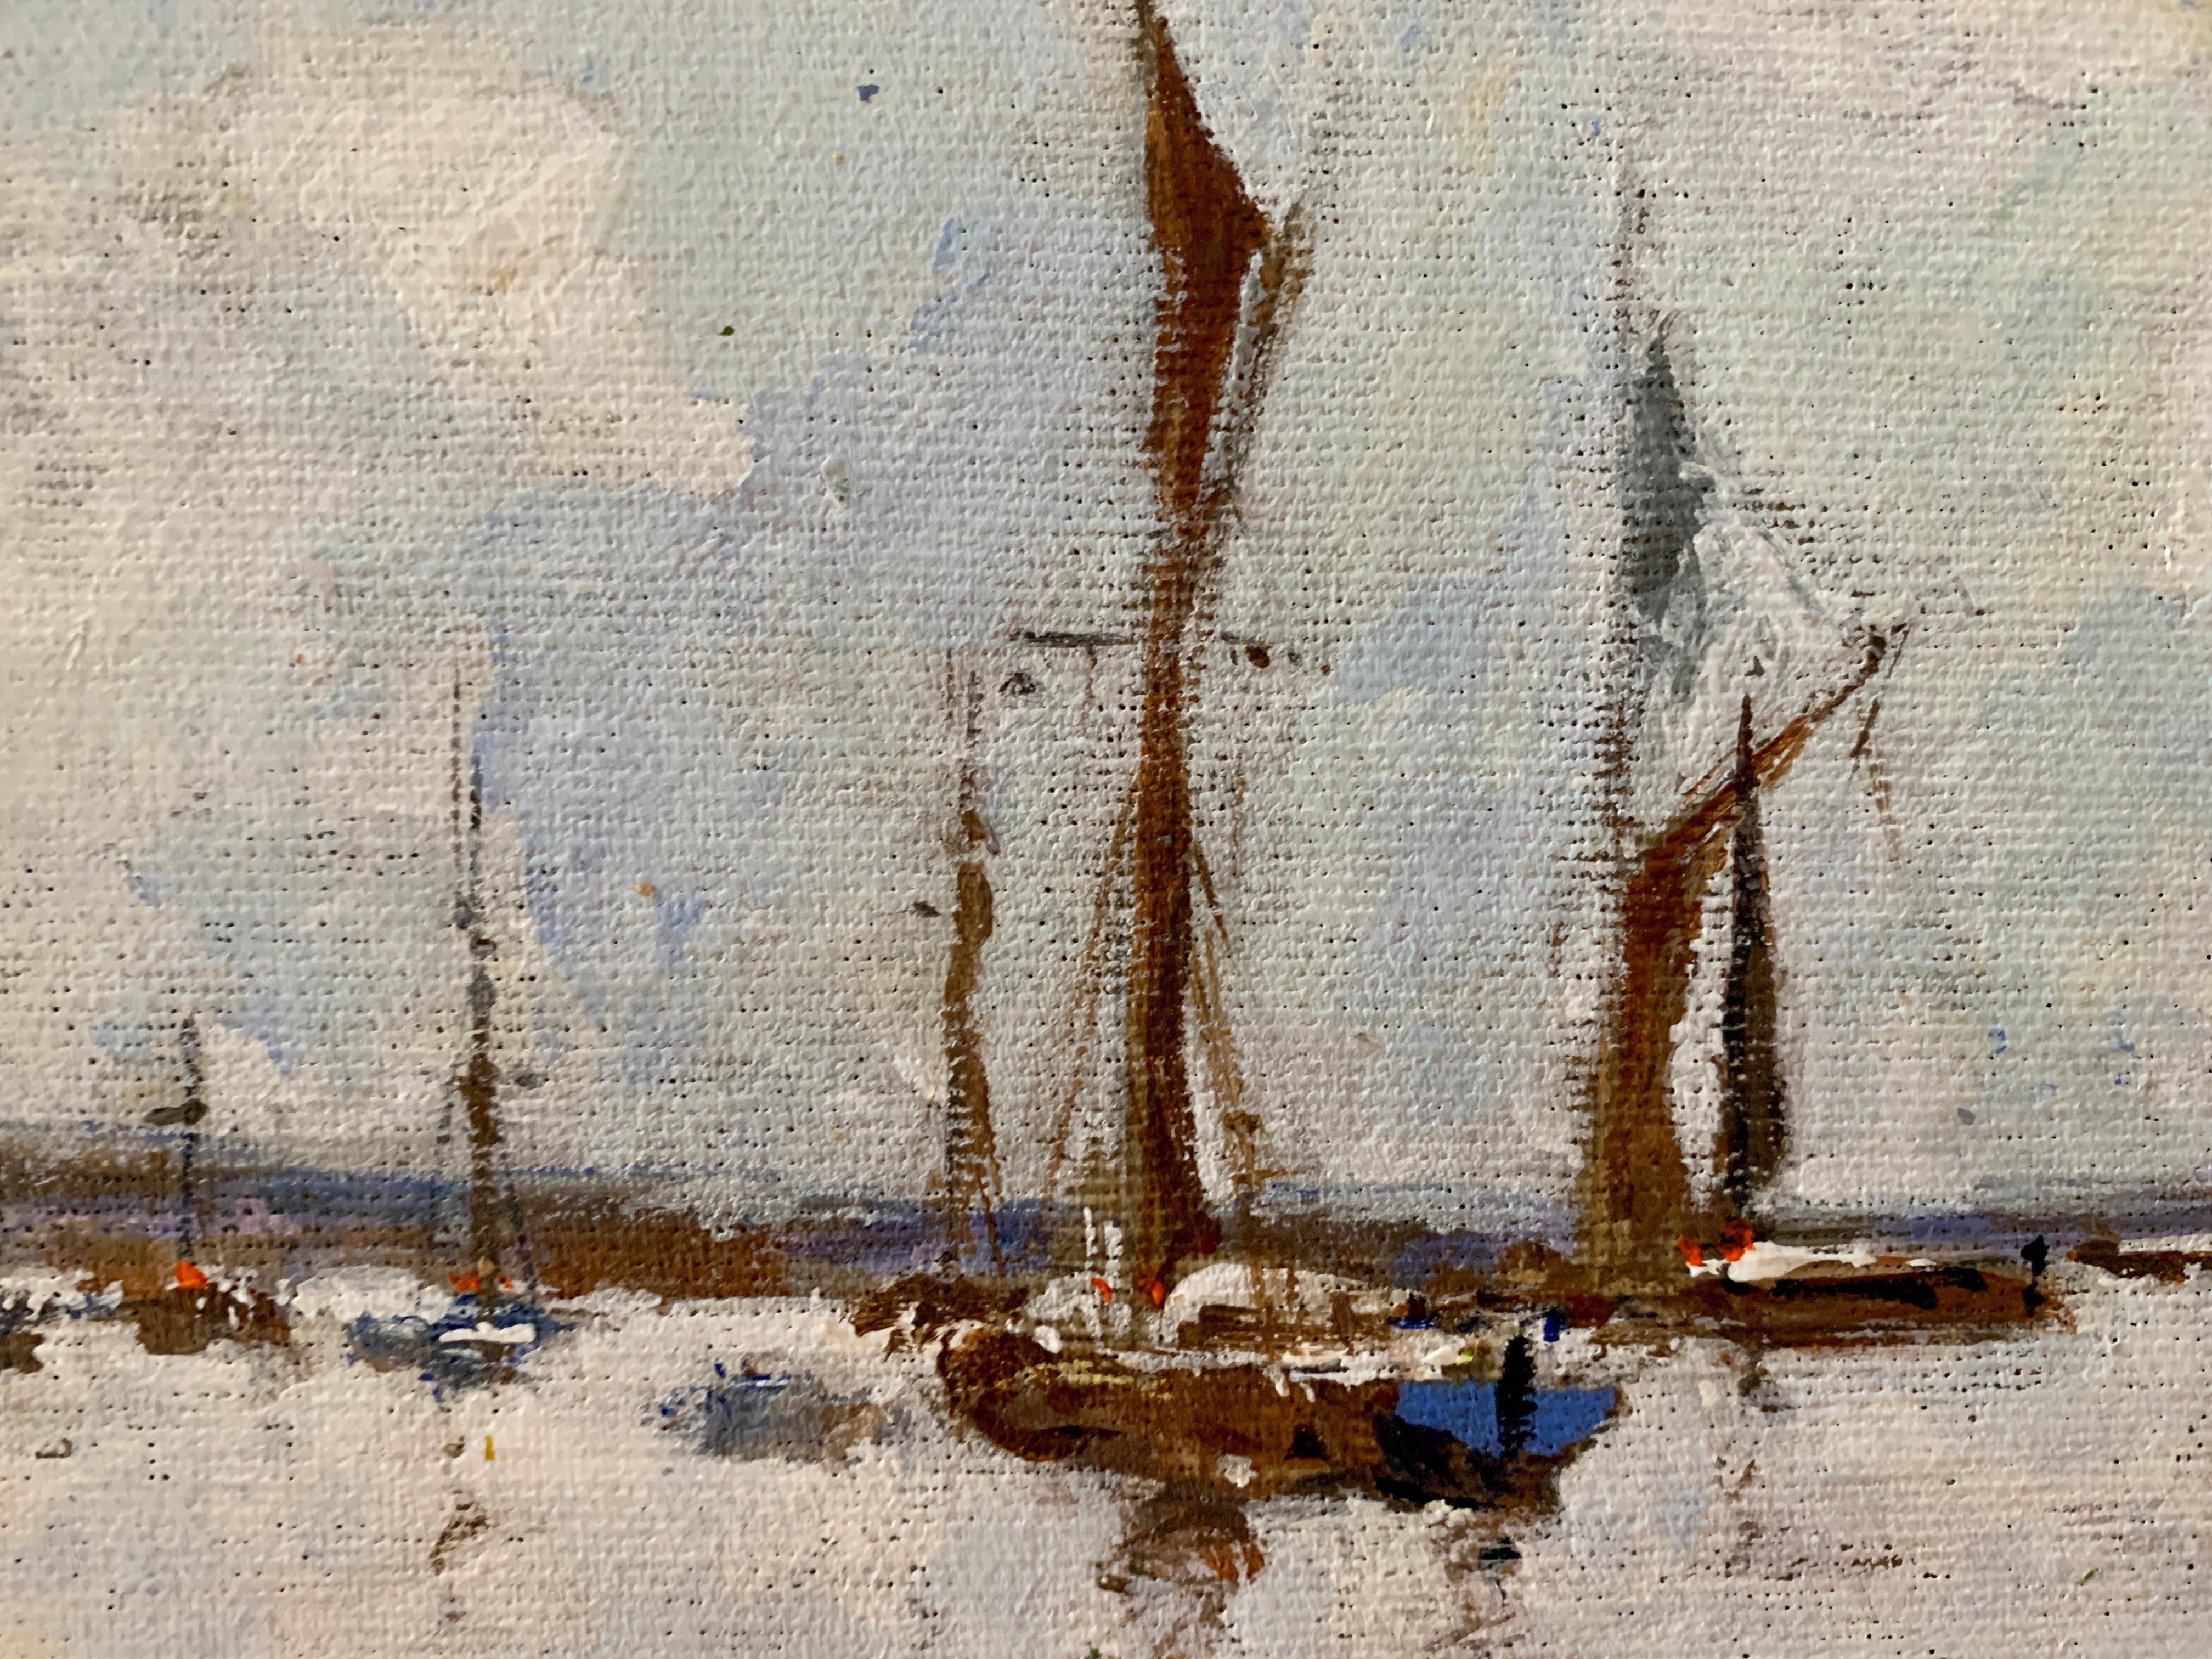 American Impressionist sketch of an American Yacht moored in a harbor , CT or MA - Brown Figurative Painting by Charles Bertie Hall